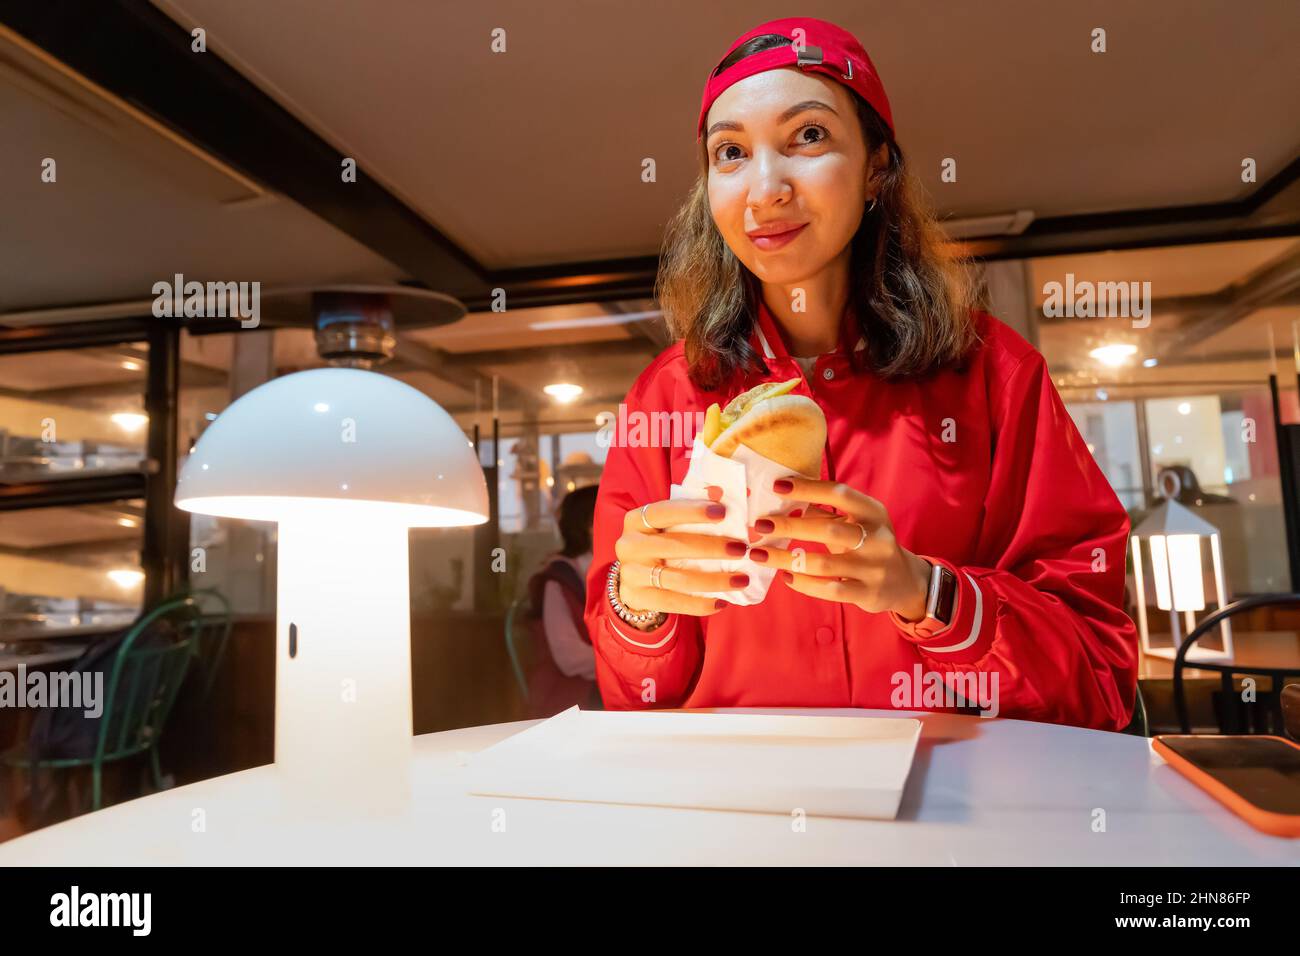 Happy woman eating gyros or a hot dog in a fast food restaurant Stock Photo